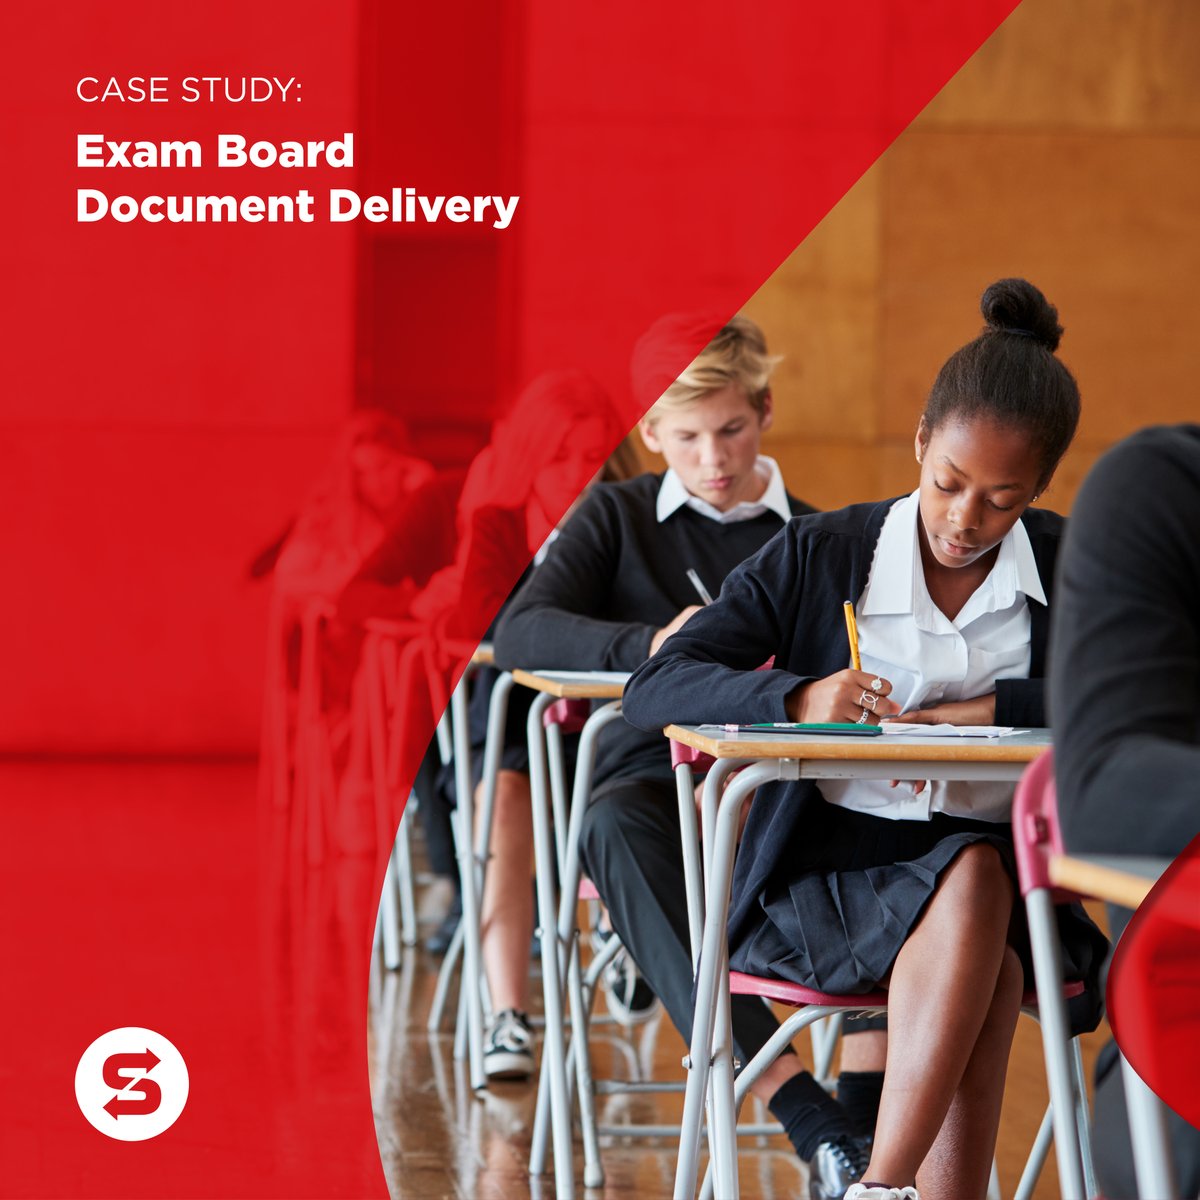 Read our latest case study to see how Speedy Freight's dedicated delivery service helped one of the UK’s largest exam boards distribute their documents nationwide. ➡️ hubs.la/Q02sdSPP0